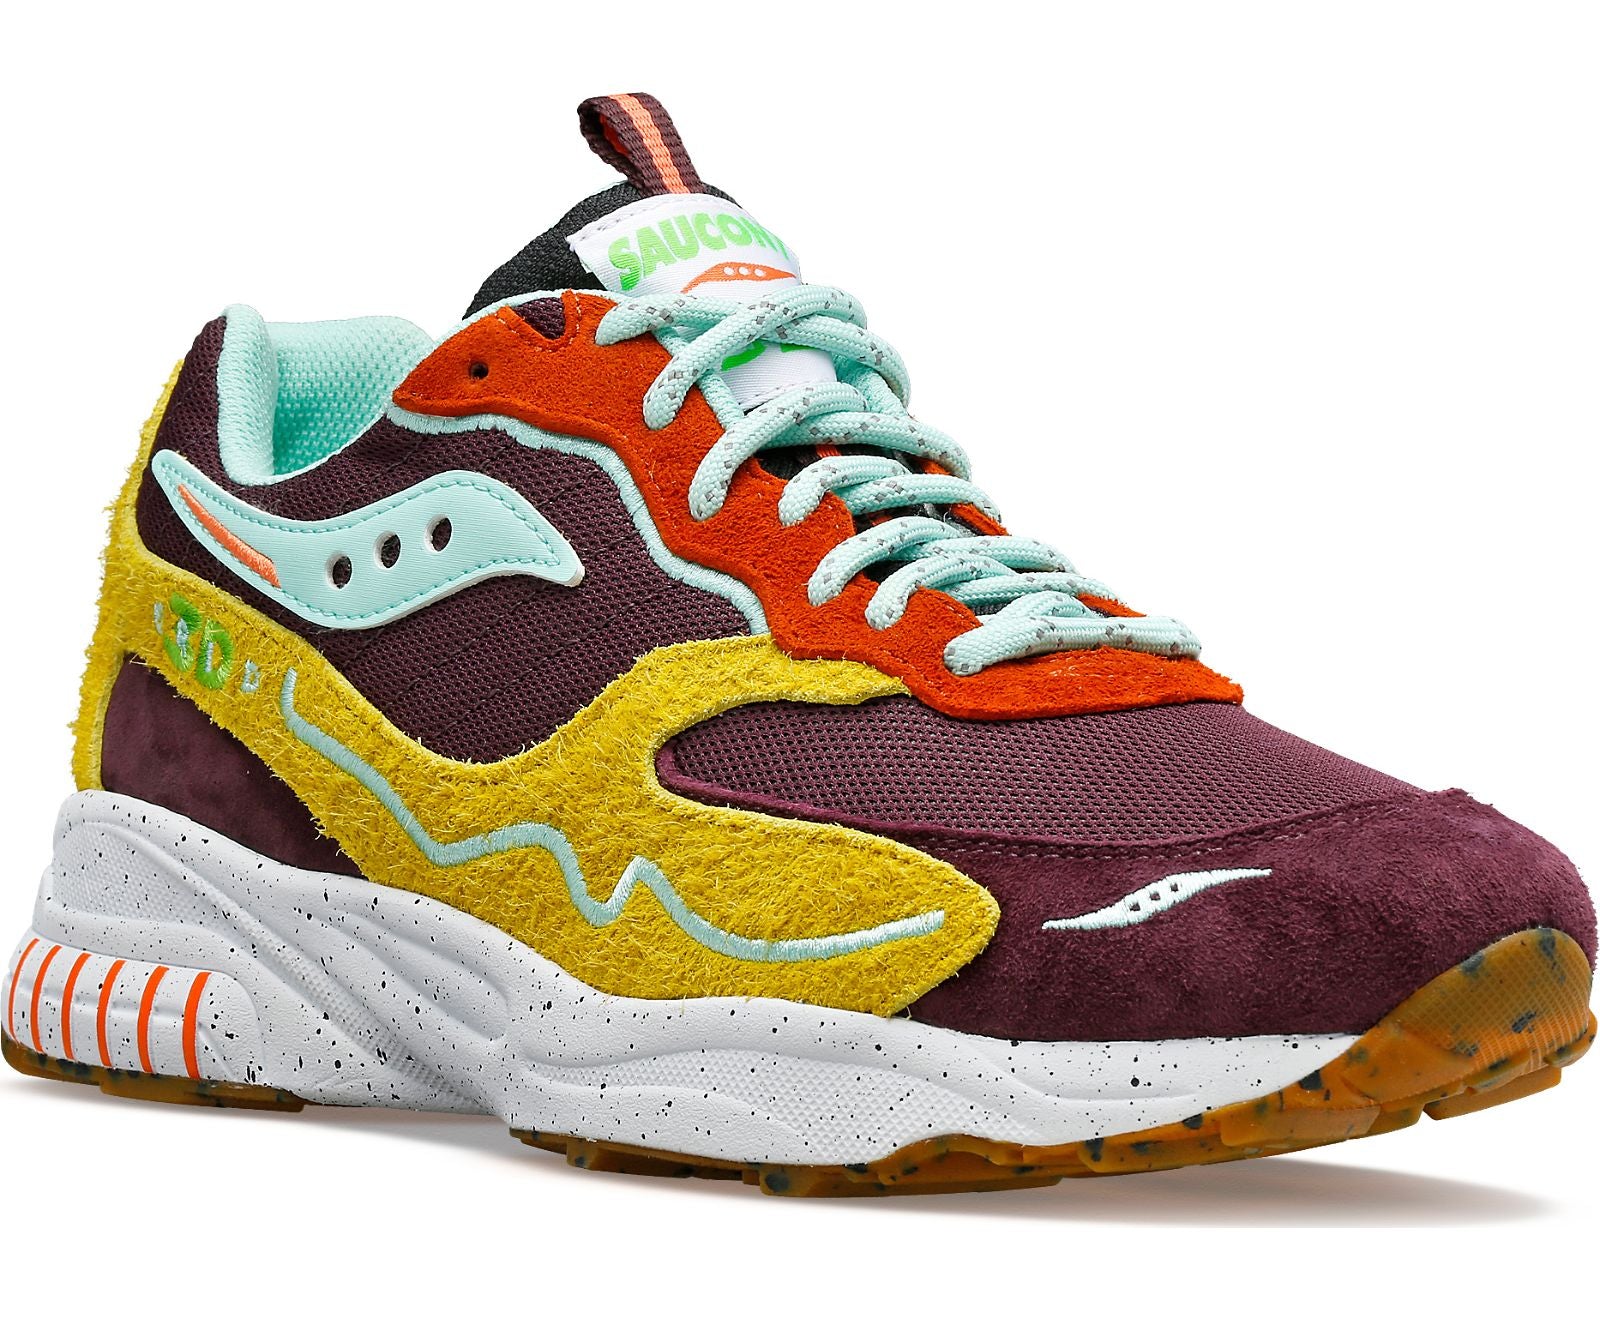 Front angle view of the Men's 3D Grid Trailian by Saucony in the color Brown/Mustard